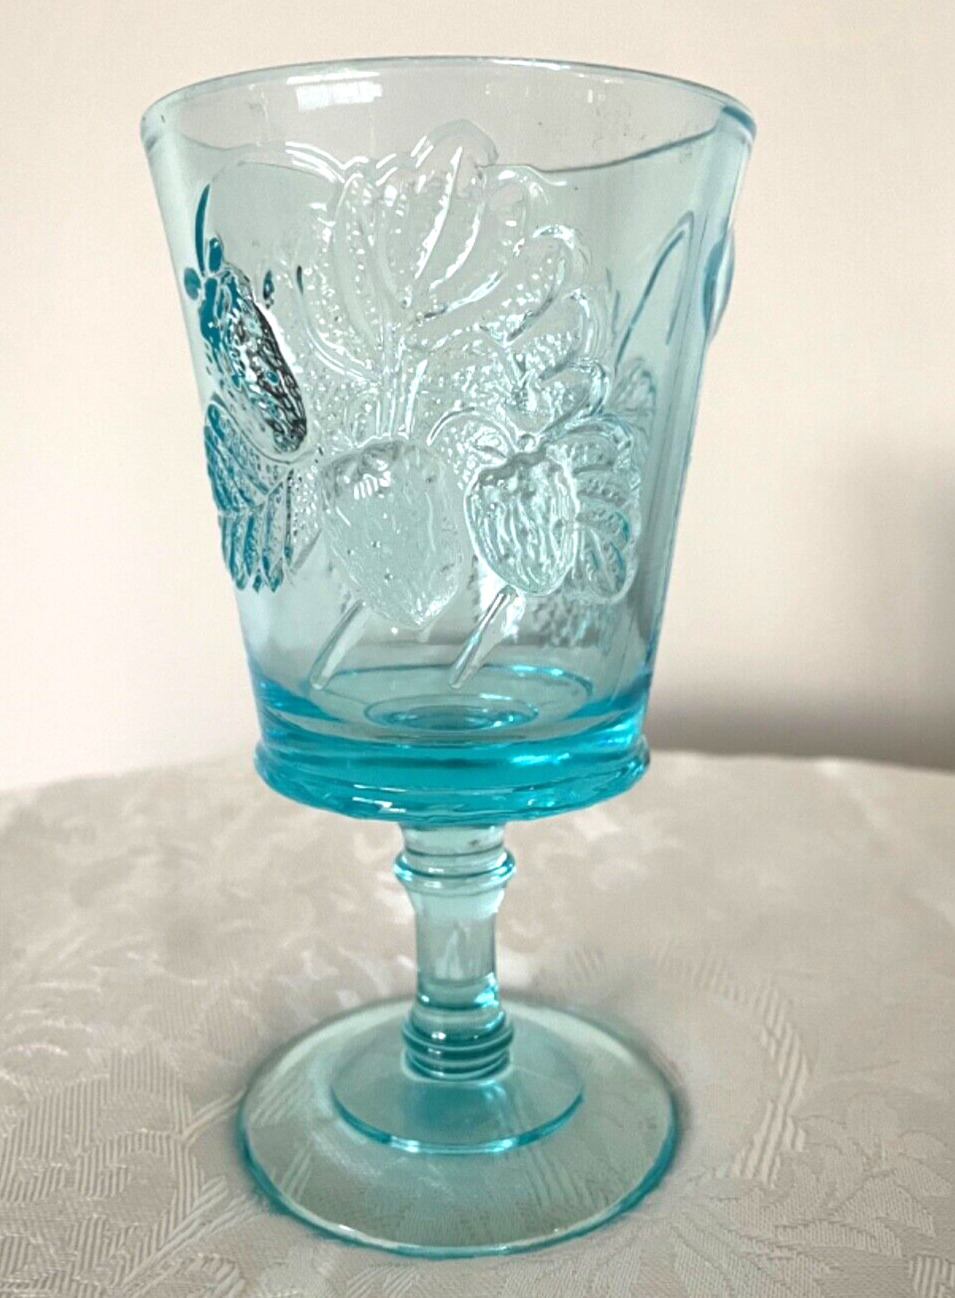 L.G. Wright Strawberry & Currant Turquoise Aqua Pressed Water Goblet 6 1/4